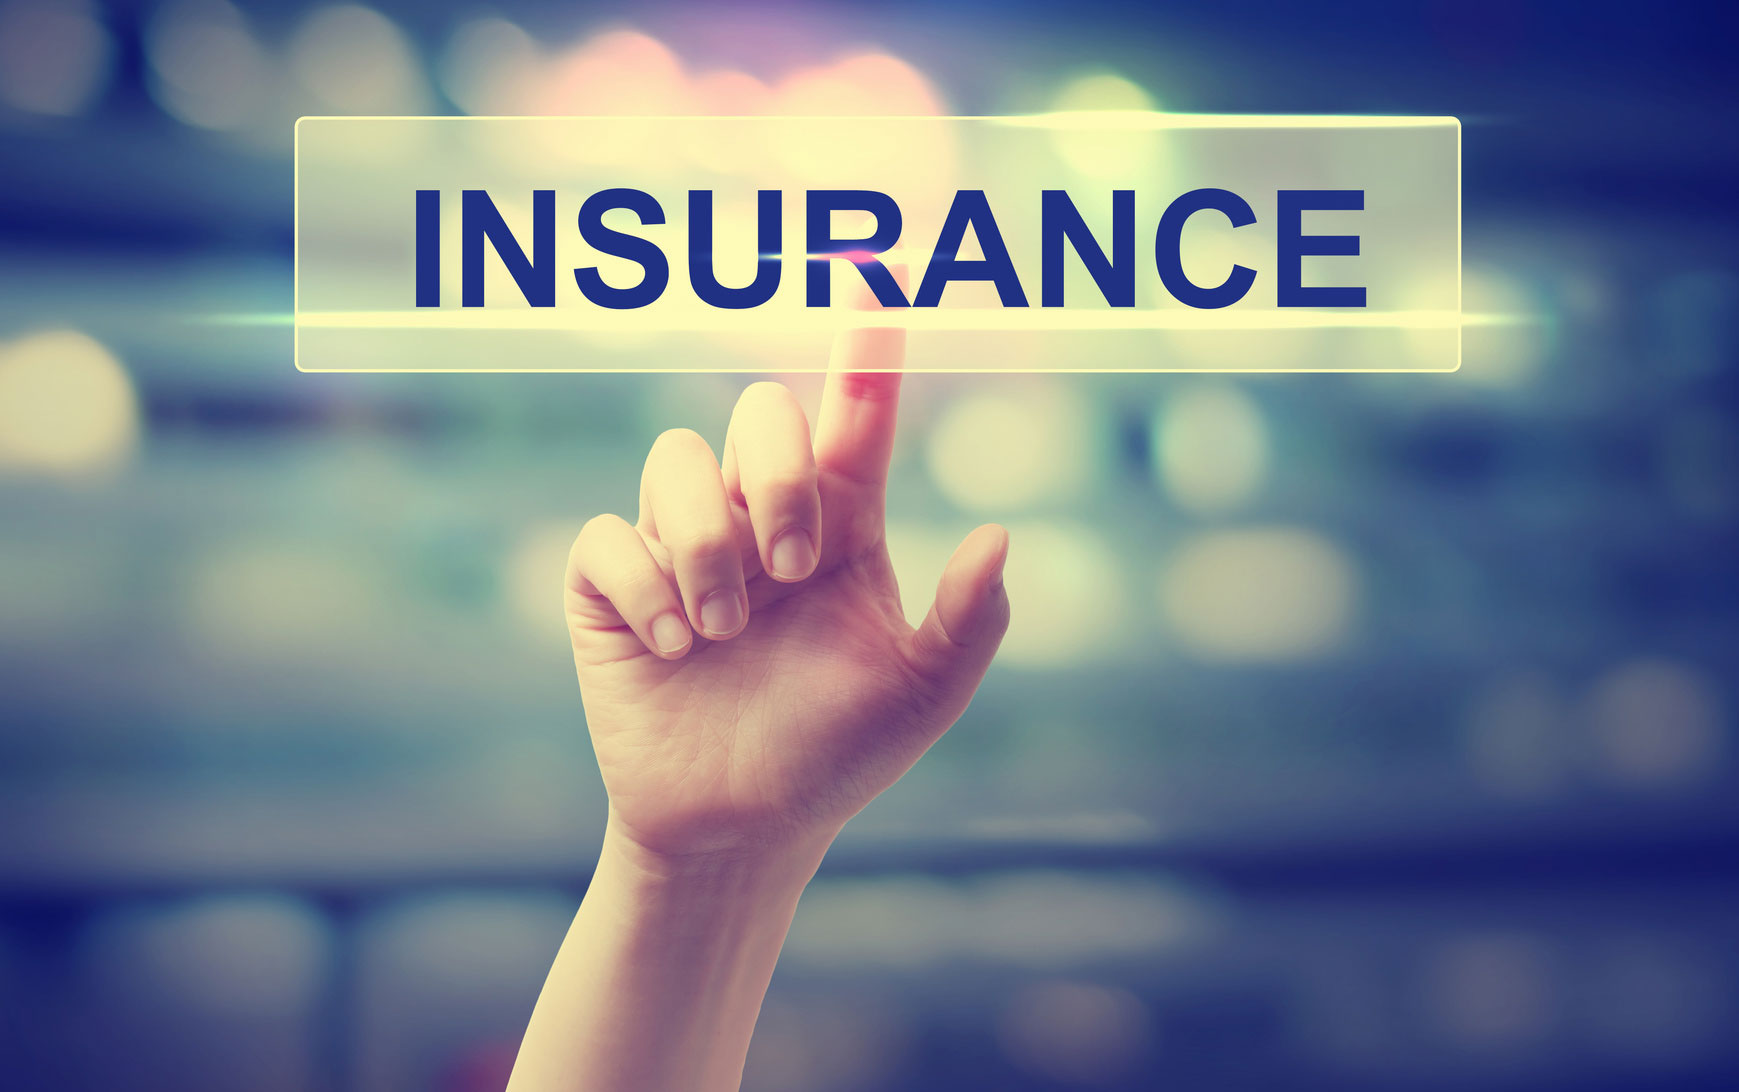 Review & Renew Your Insurance Policies for the New Year!